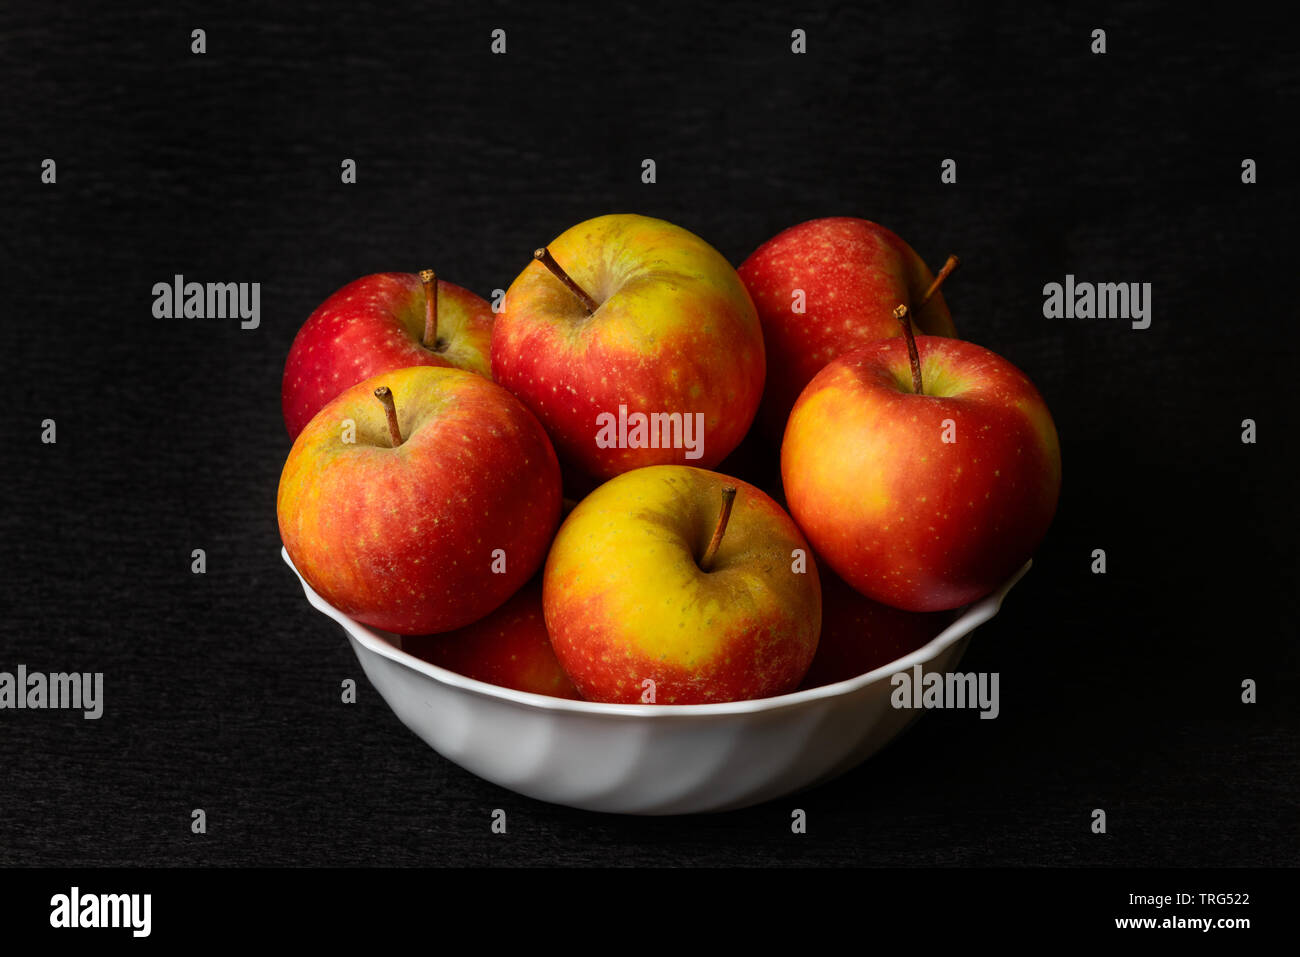 Piles of apples. Still life red apples. Nature morte of red apples in white bowl on black background. Stock Photo